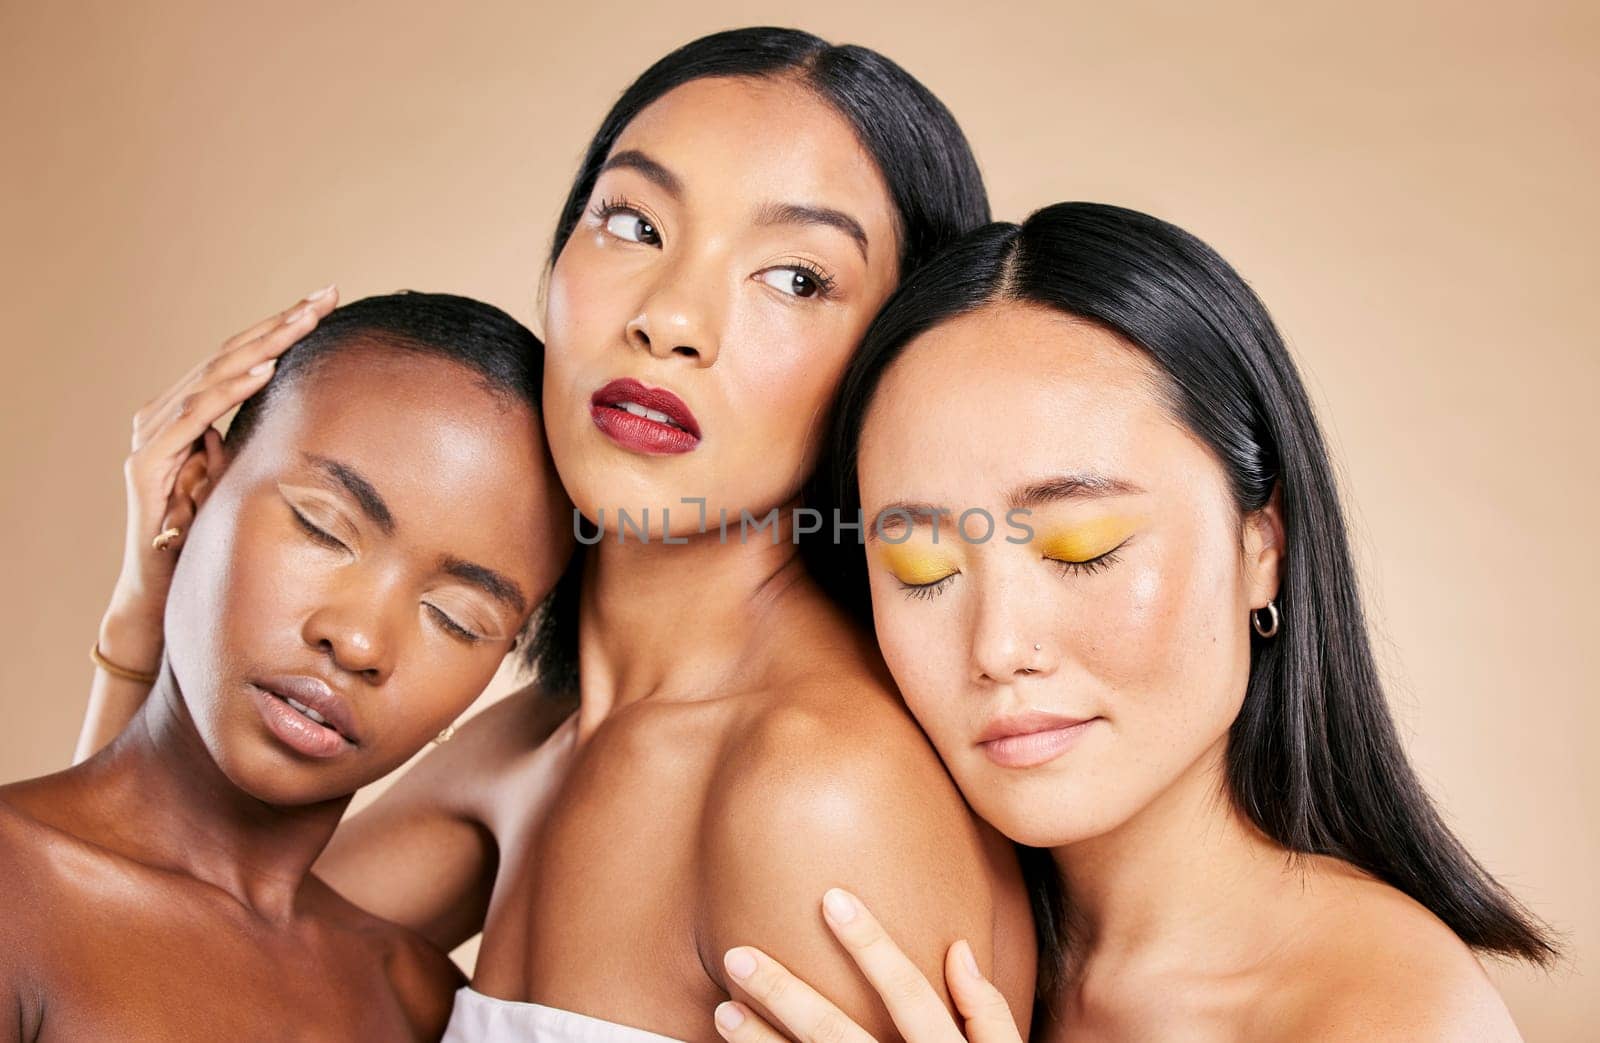 Women support, makeup and face dermatology for skincare wellness, cosmetics beauty and closed eyes in brown background studio. Young model, diversity and luxury spa treatment for natural glowing skin.